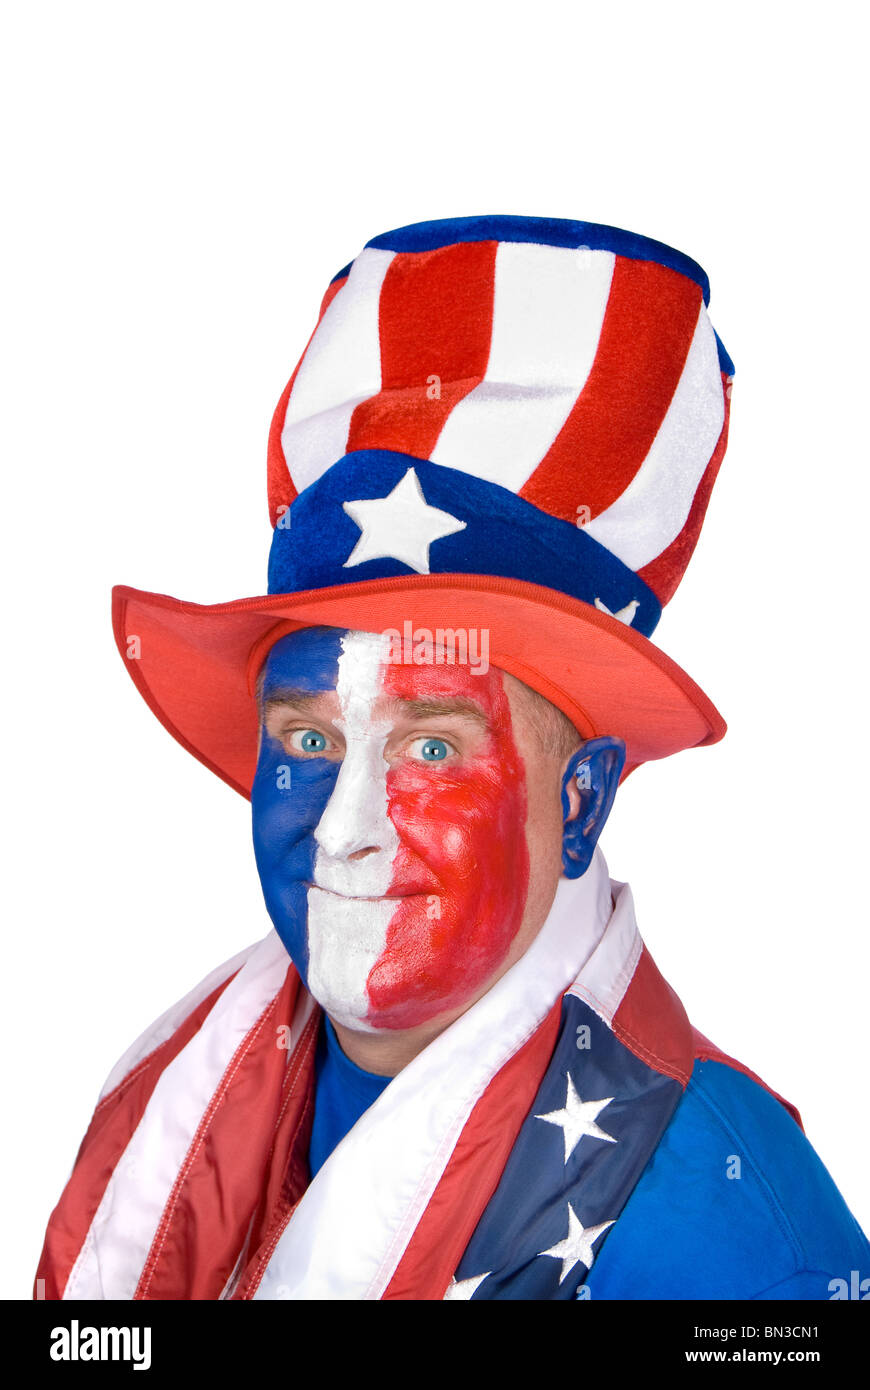 Premium Photo  A man with a blue face paint and a red and white face paint.